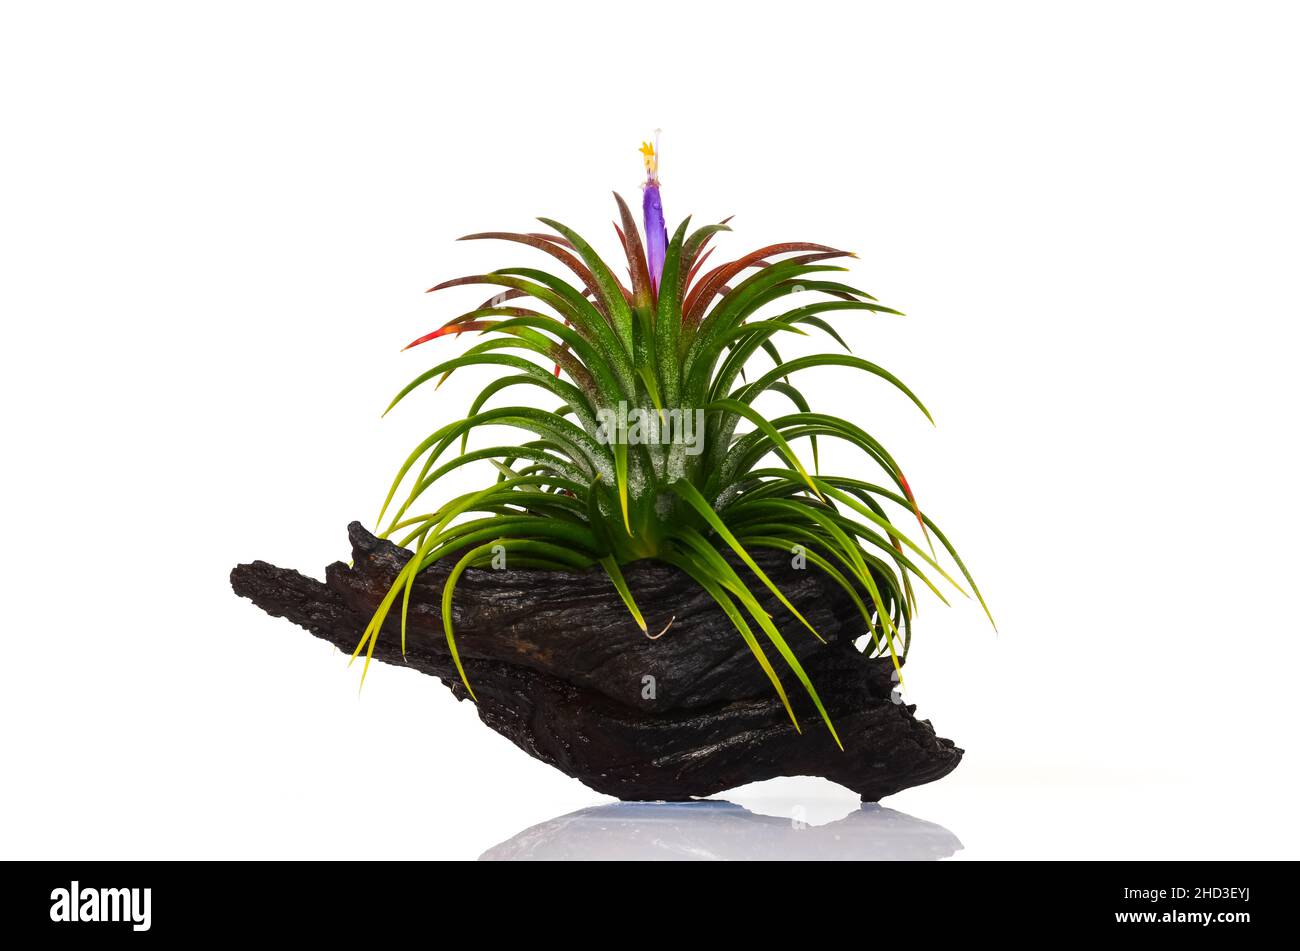 Blooming air plant - Tillandsia with its colorful flowers plant in wooden log on white background. Stock Photo